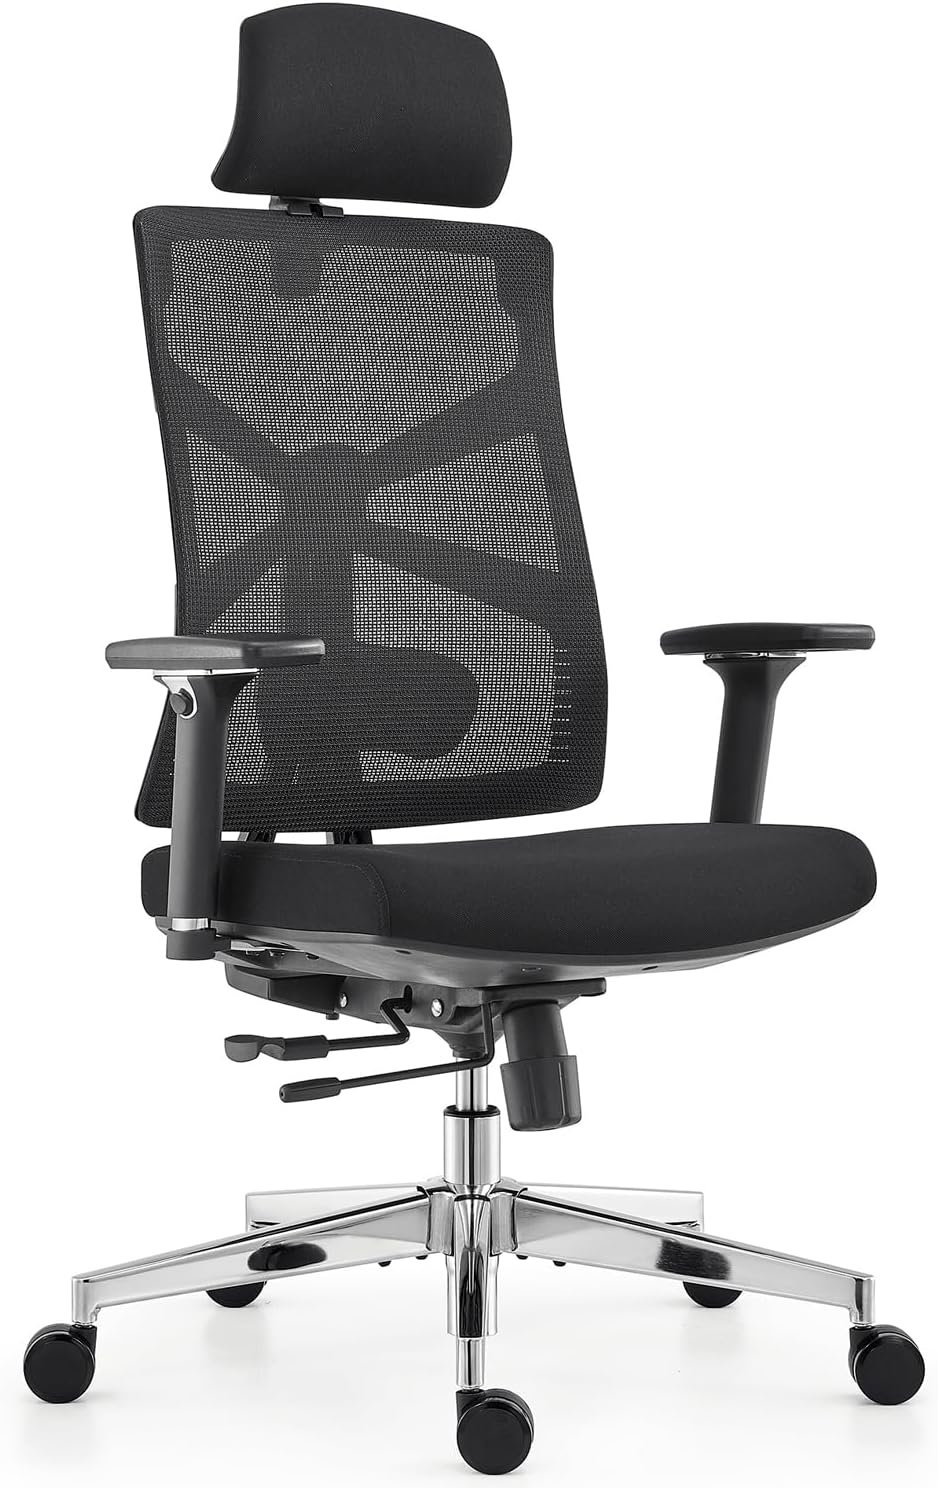 HOLLUDLE Ergonomic Office Chair with Adaptive Backrest, High Back Computer Desk Chair with 4D Armrests, Adjustable Seat Depth, Lumbar Support and 2D Headrest, Swivel Task Chair, Black